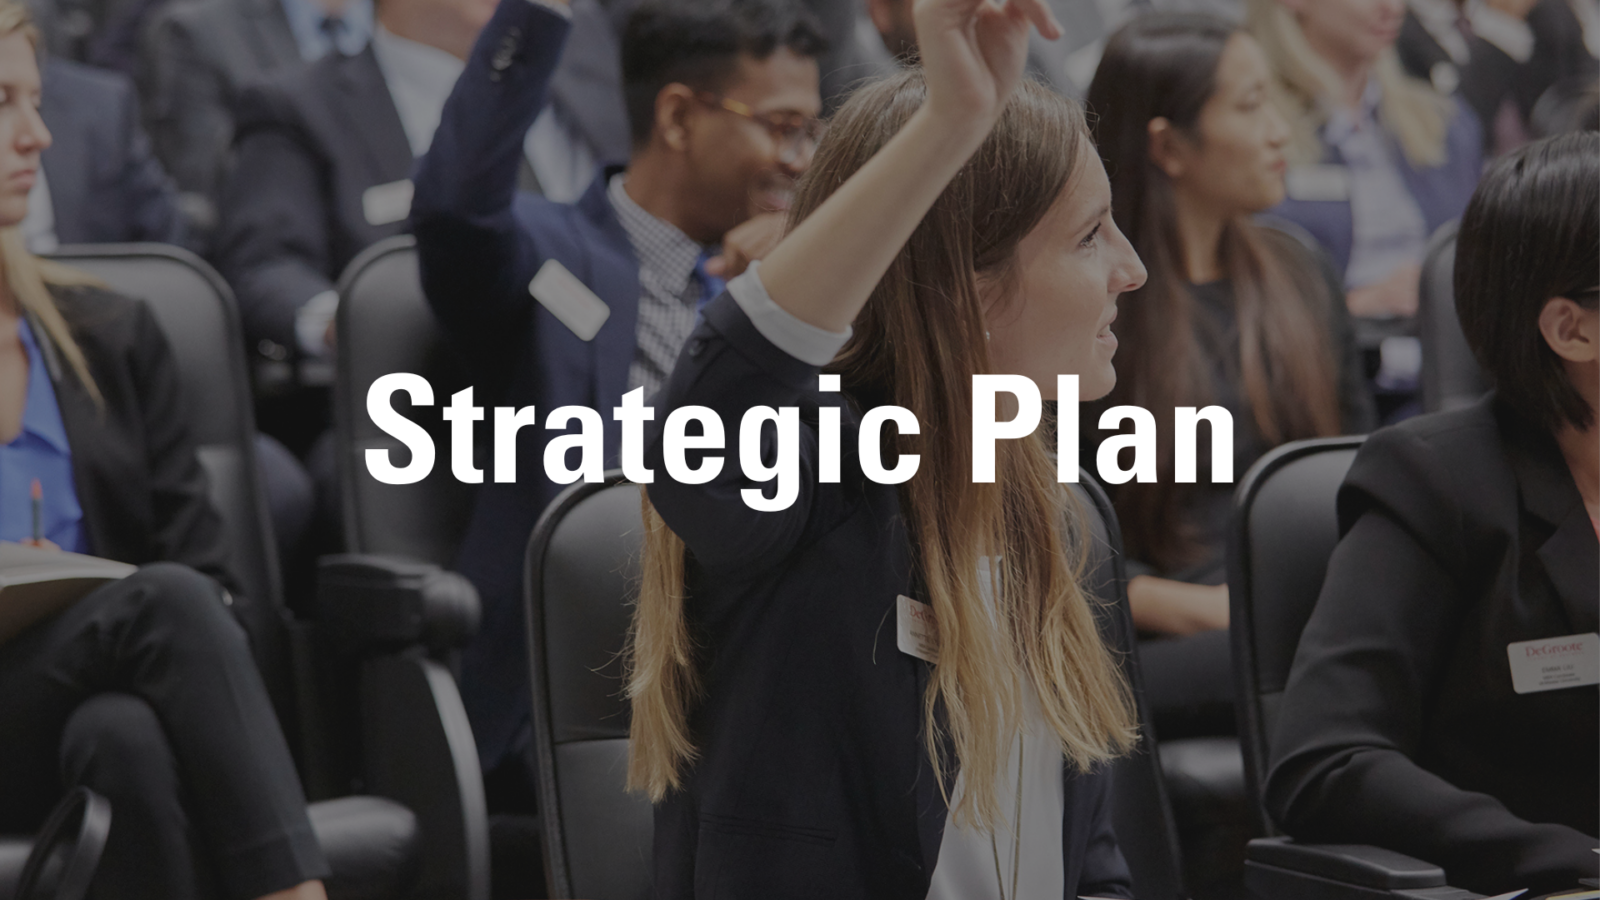 Strategic Plan Hero Image that has the text "Strategic Plan". The image behind is a DeGroote student raising her hand to ask a question.